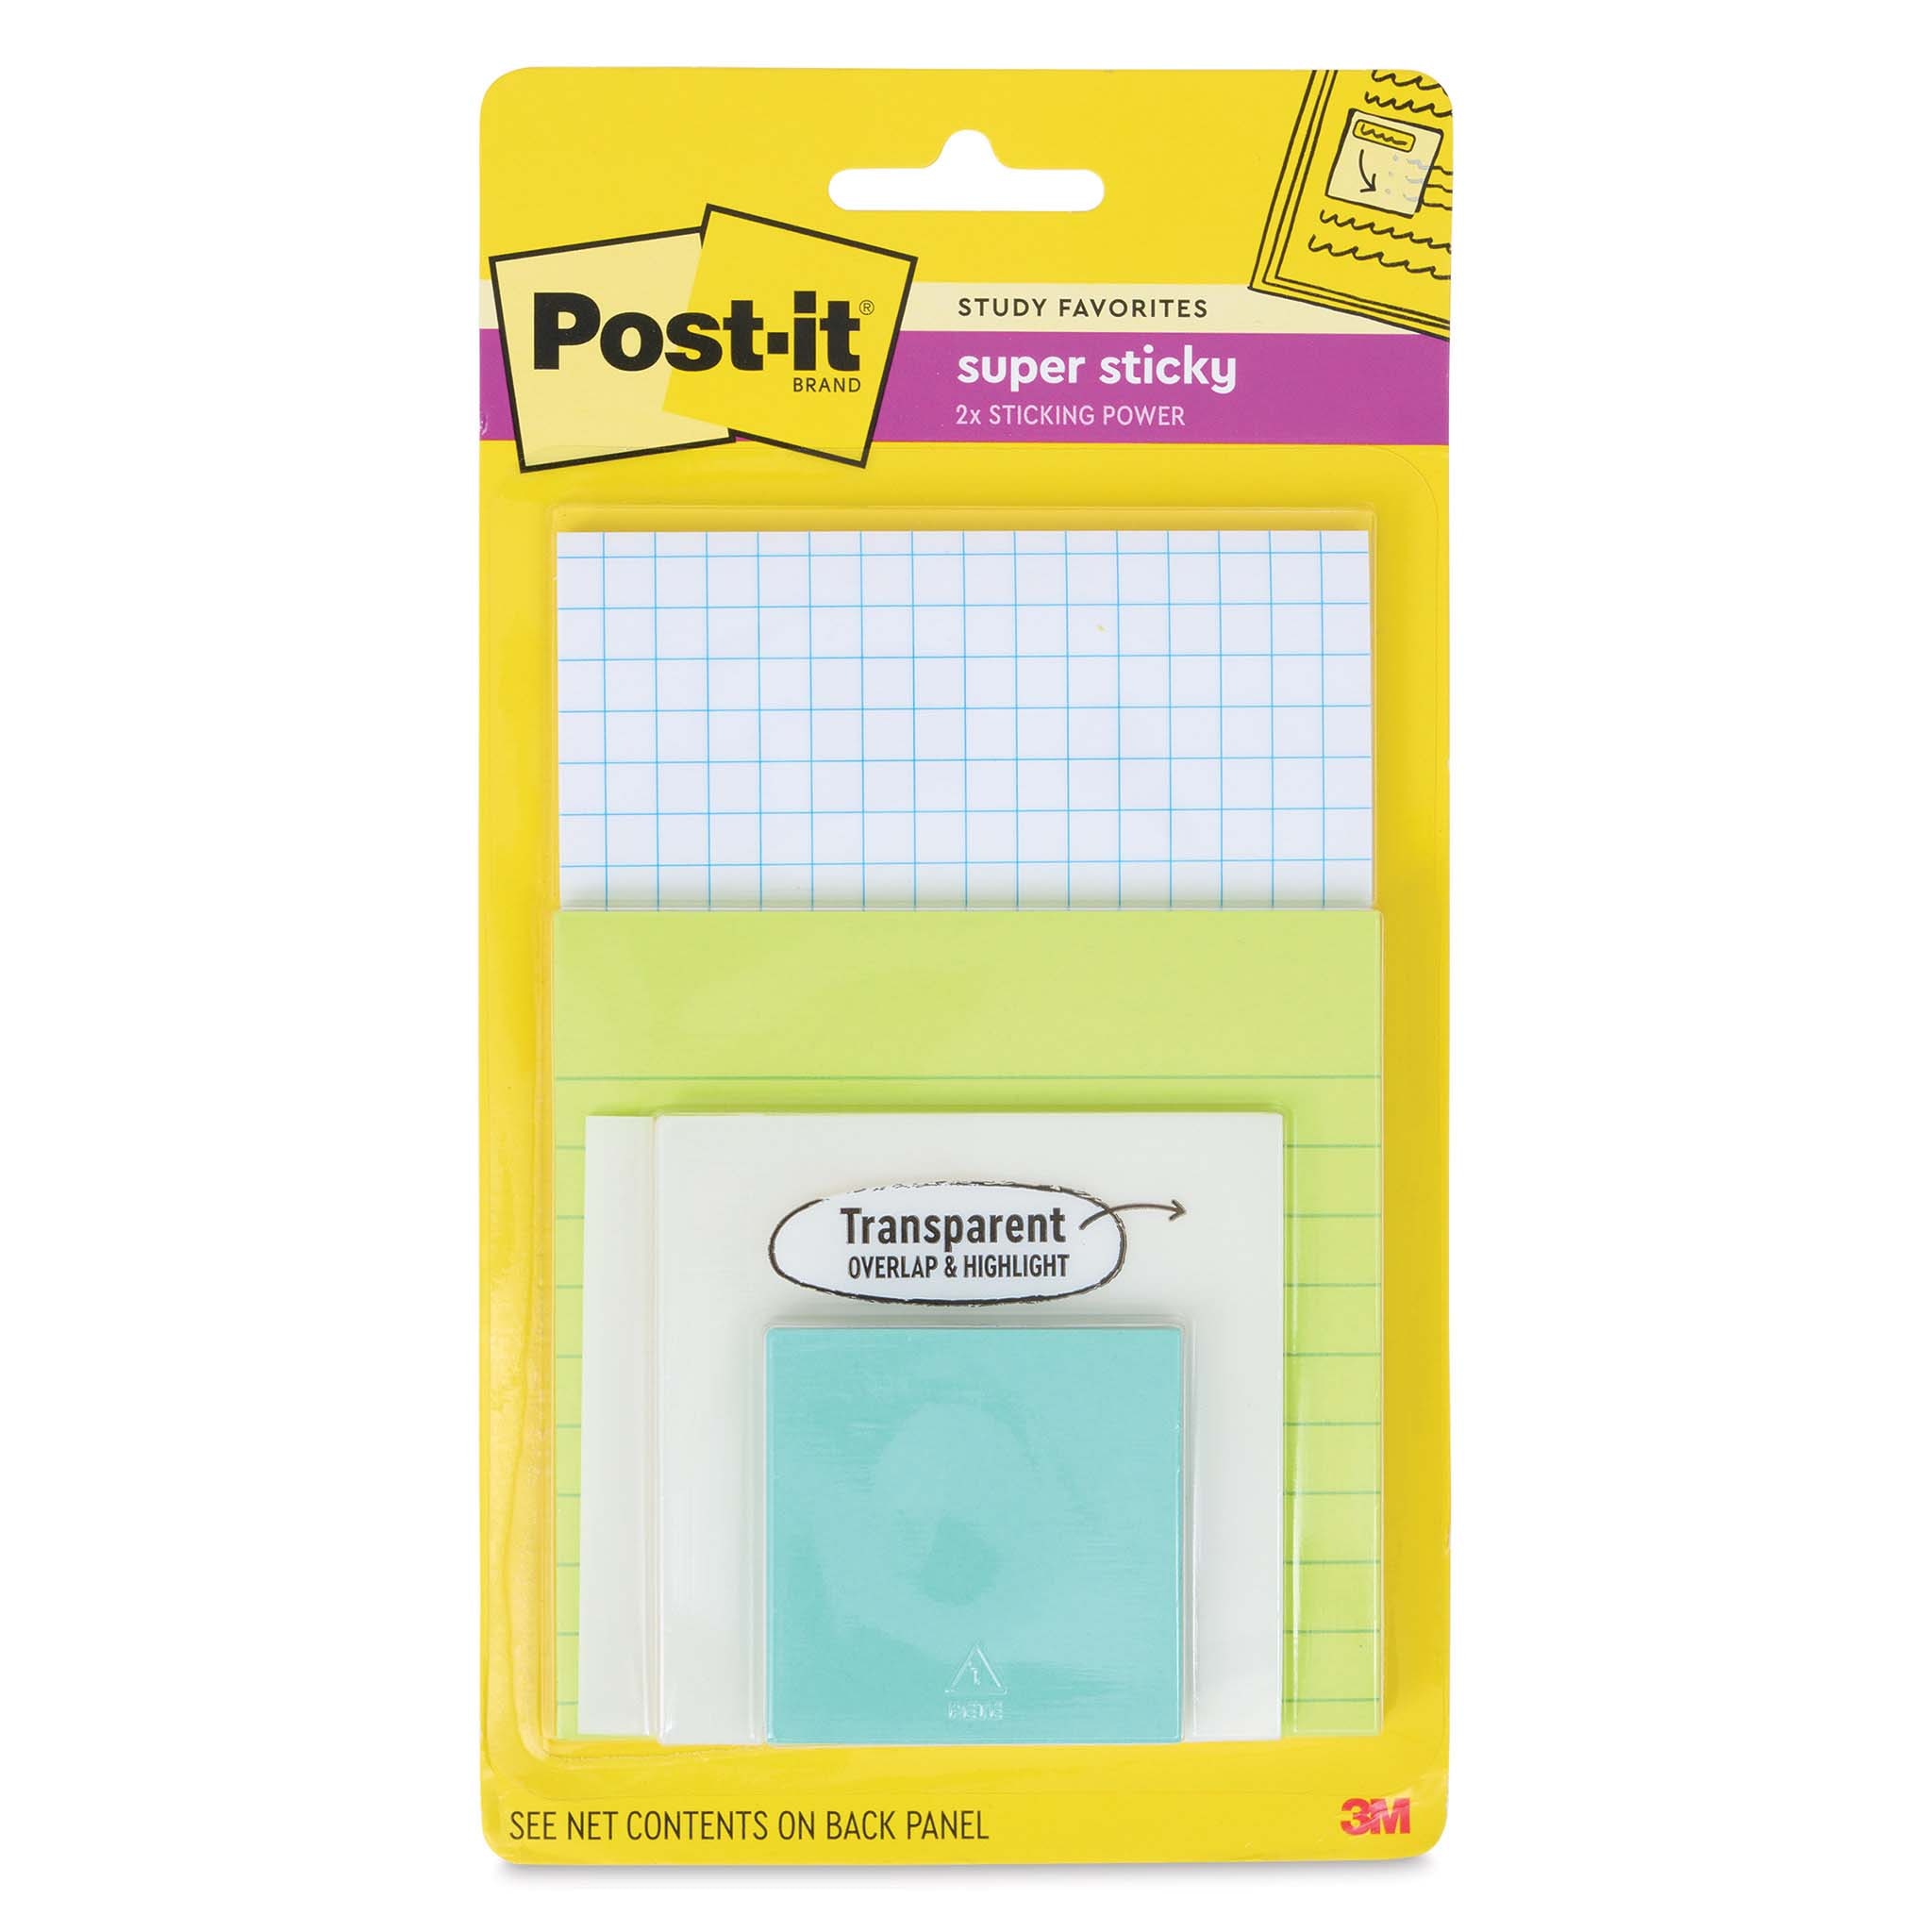 3M Post-it Multipurpose Study Notes - Variety Pack